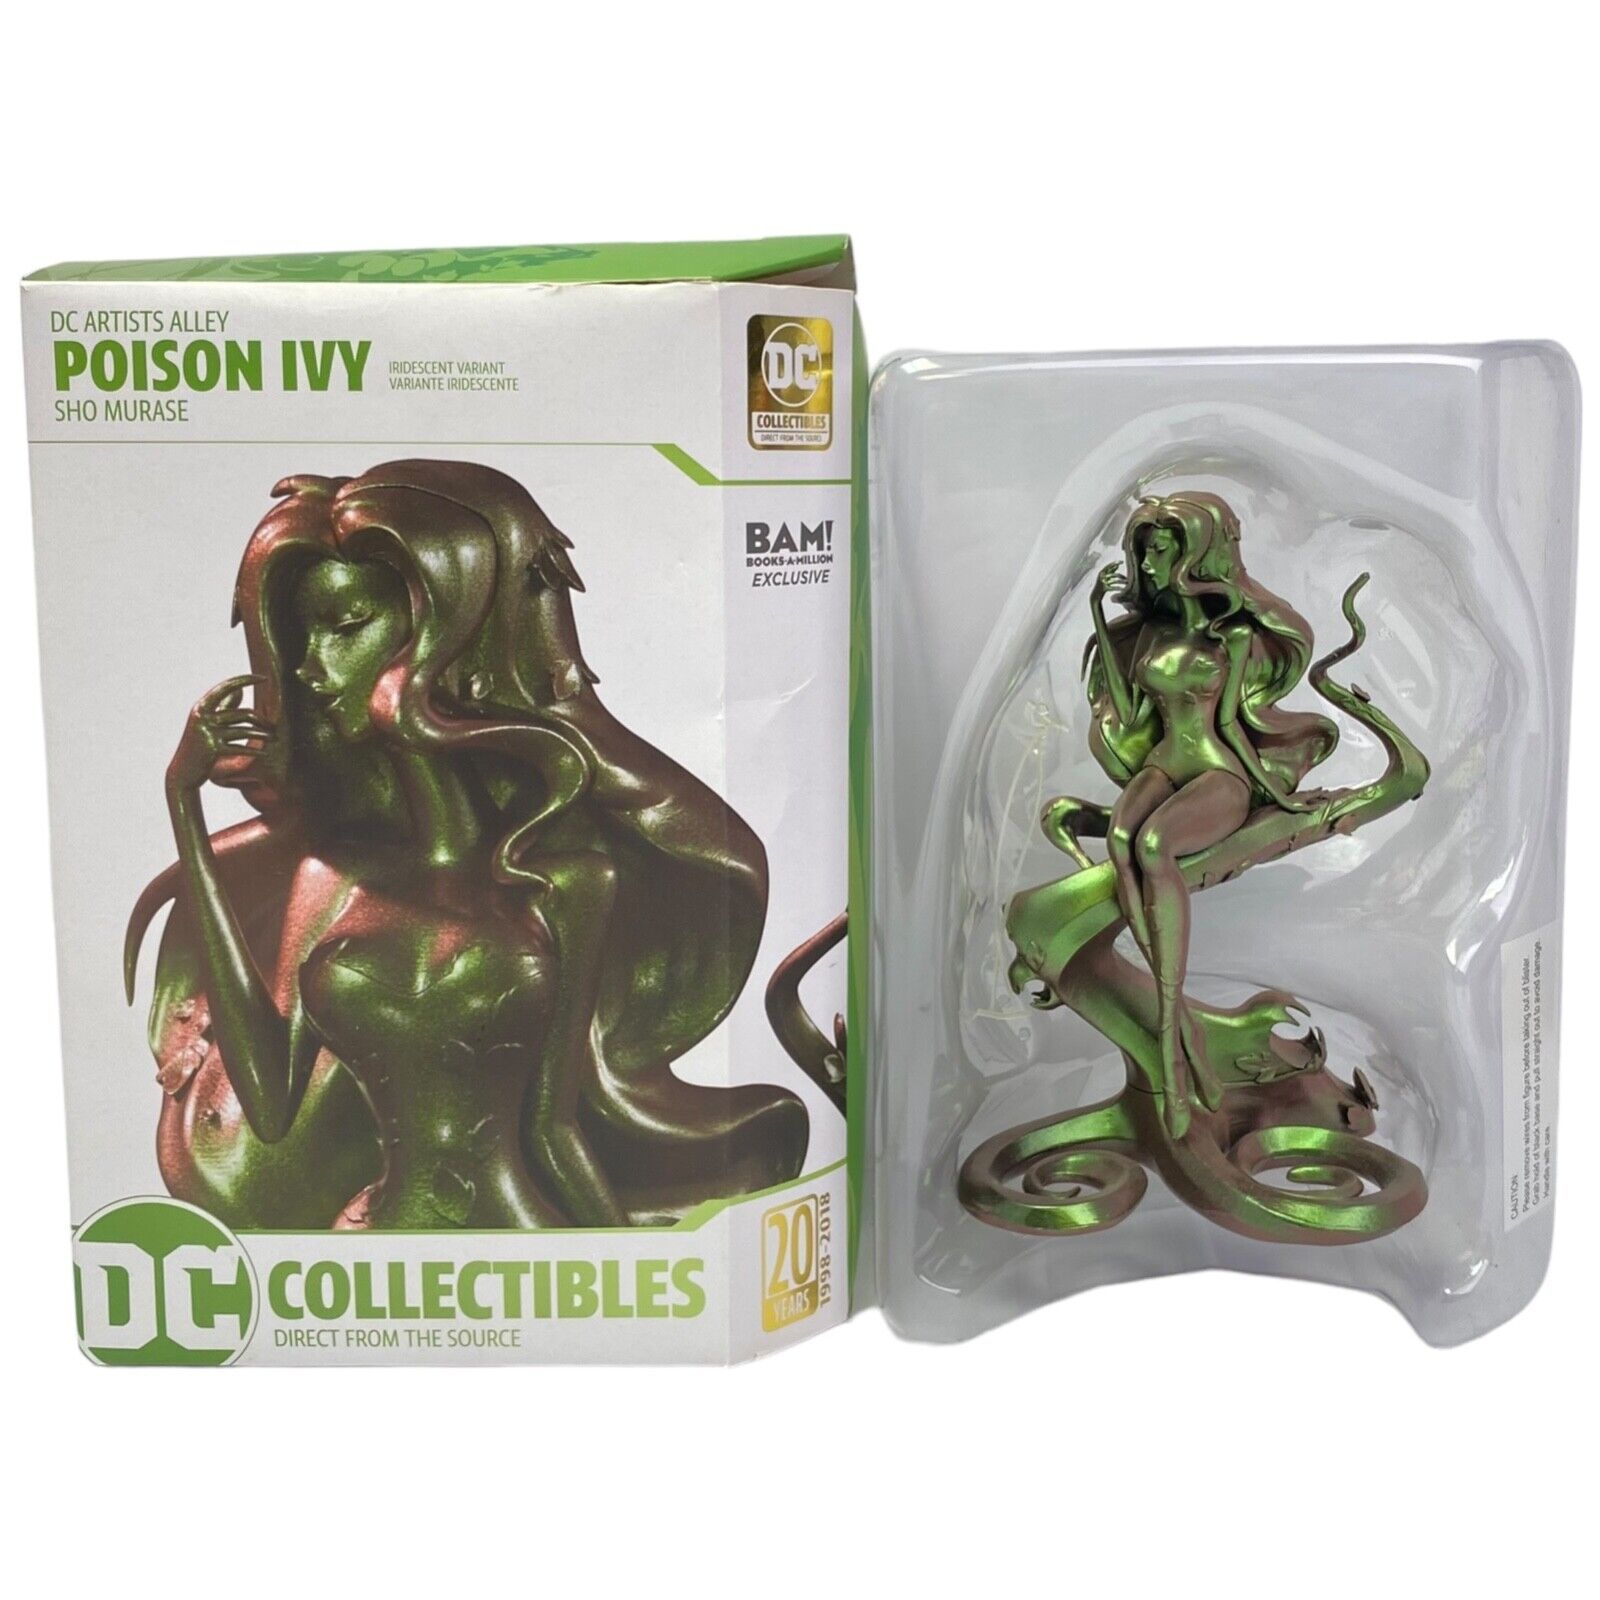 DC Artists Alley Poison Ivy Sho Murase Statue Iridescent Variant BAM Exclusive *